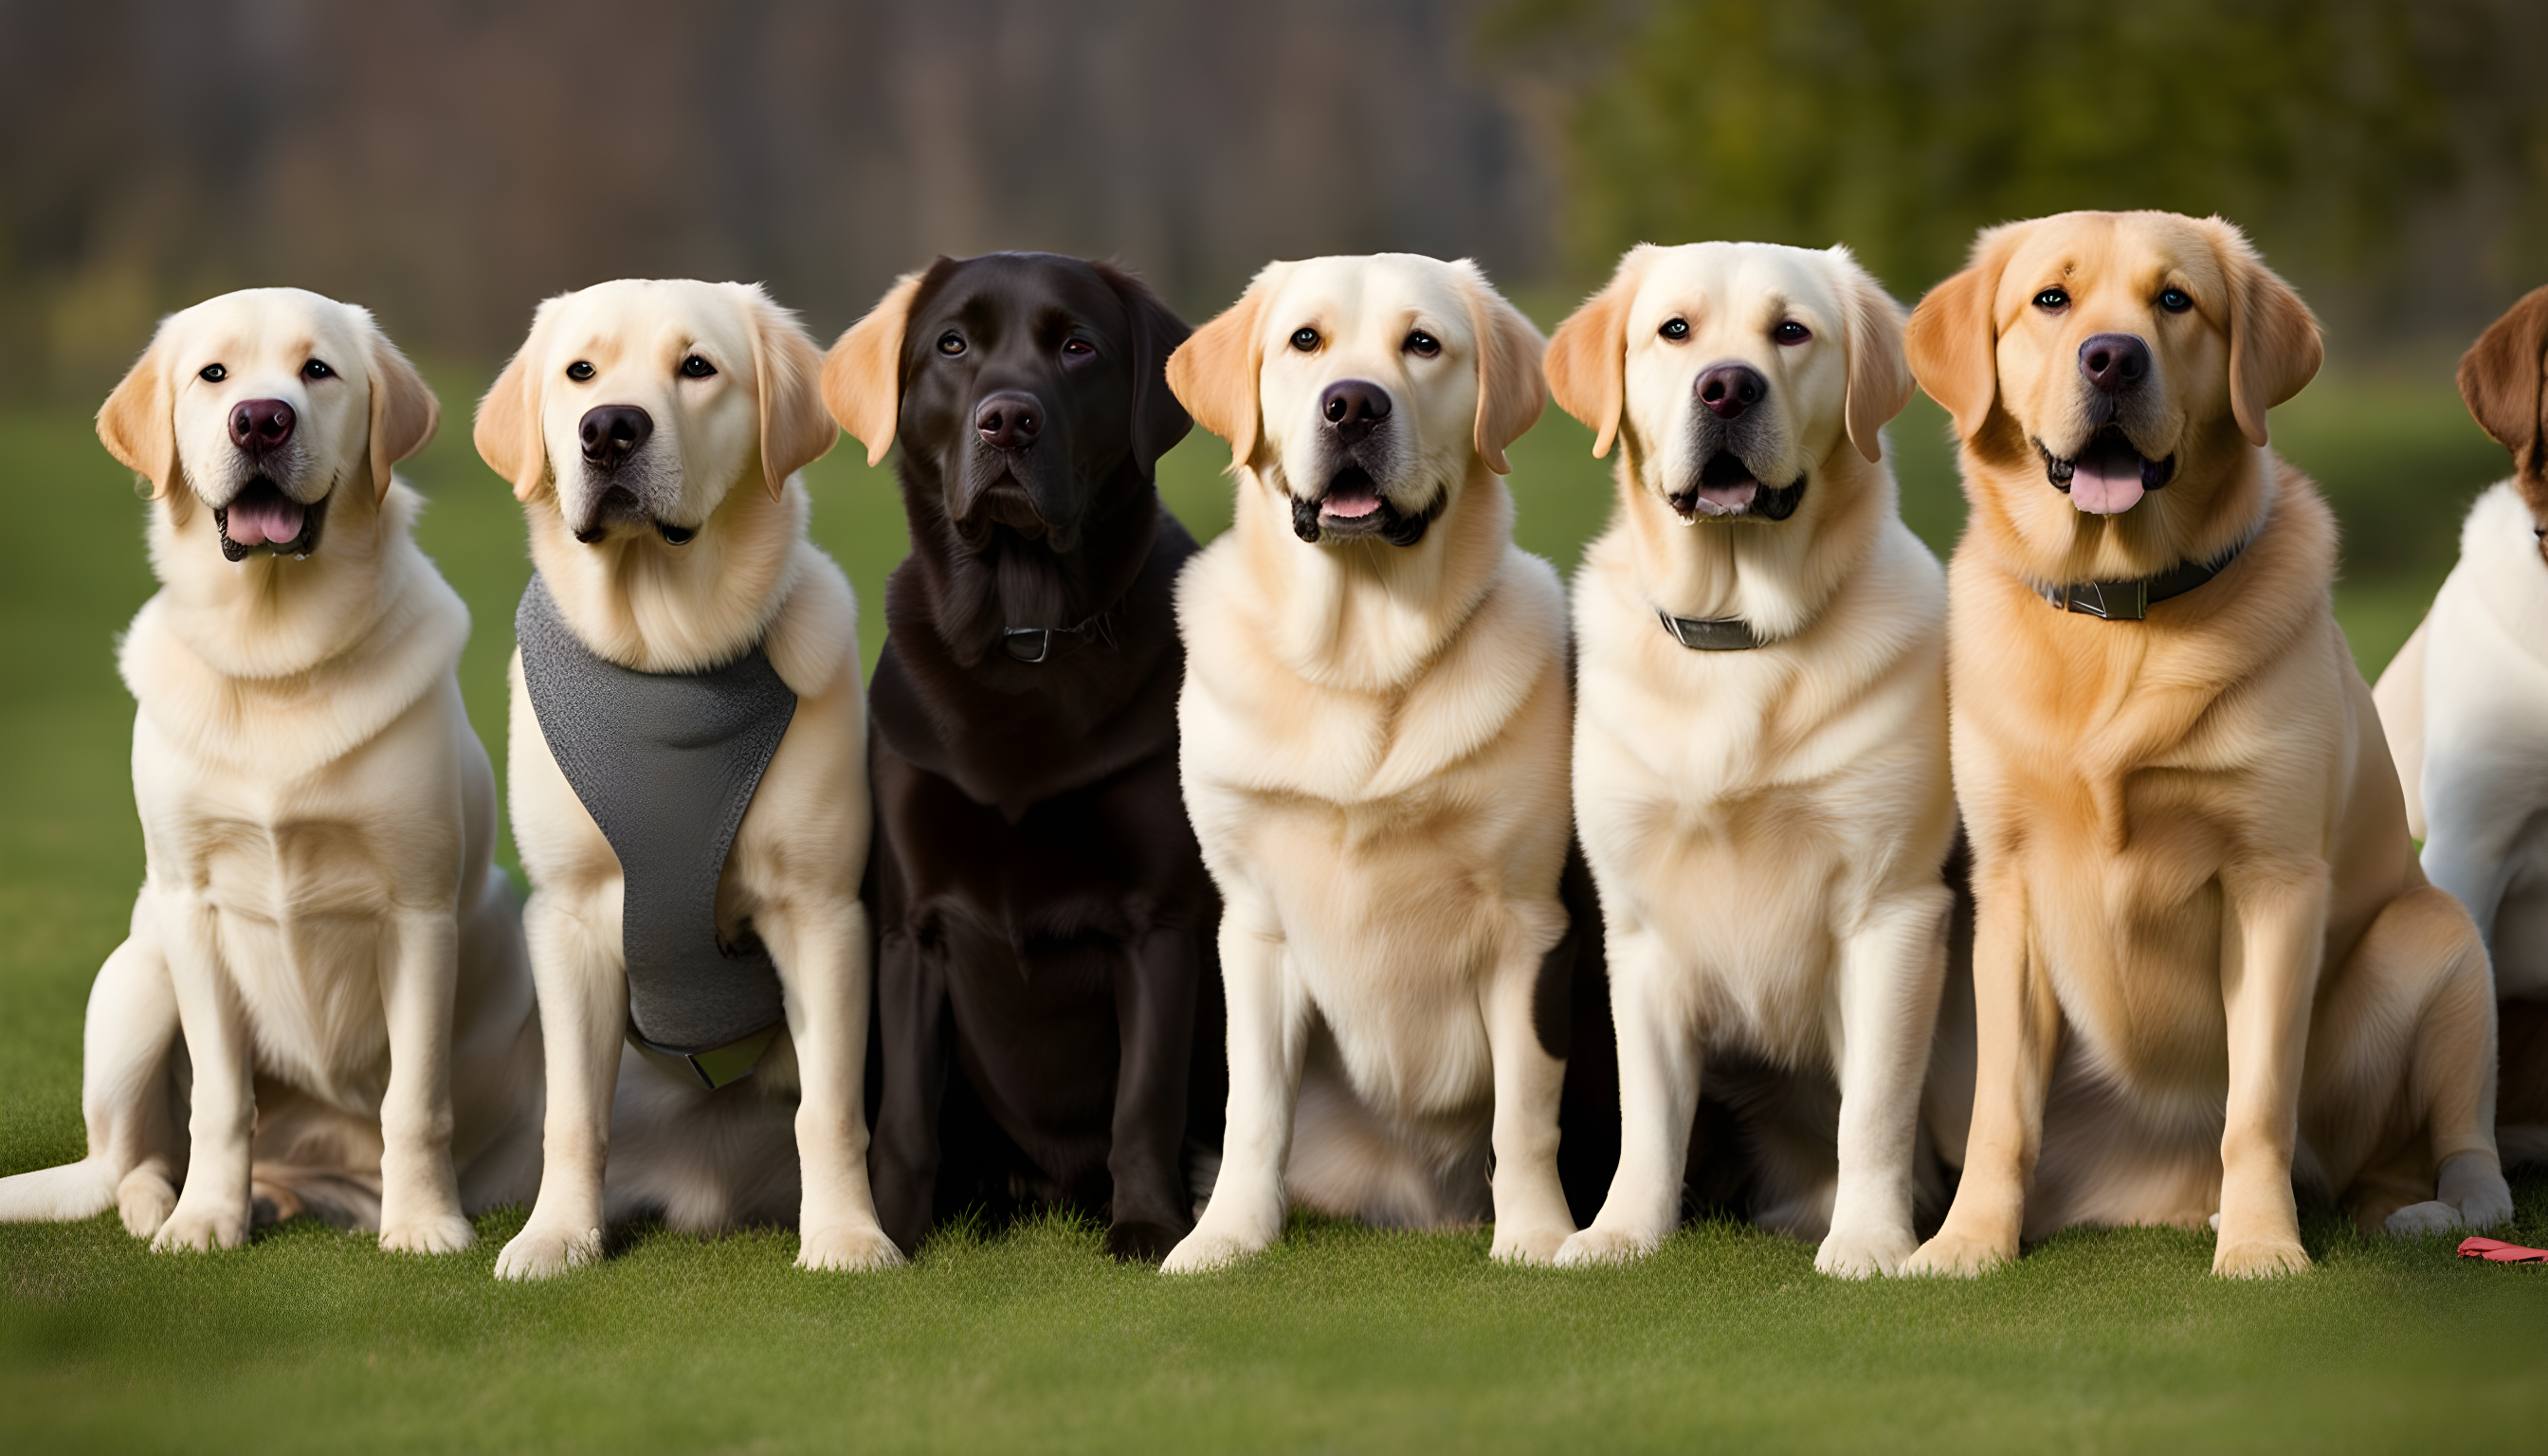 A lineup of healthy Labradors in various colors, emphasizing that good health isn't tied to any particular coat color.